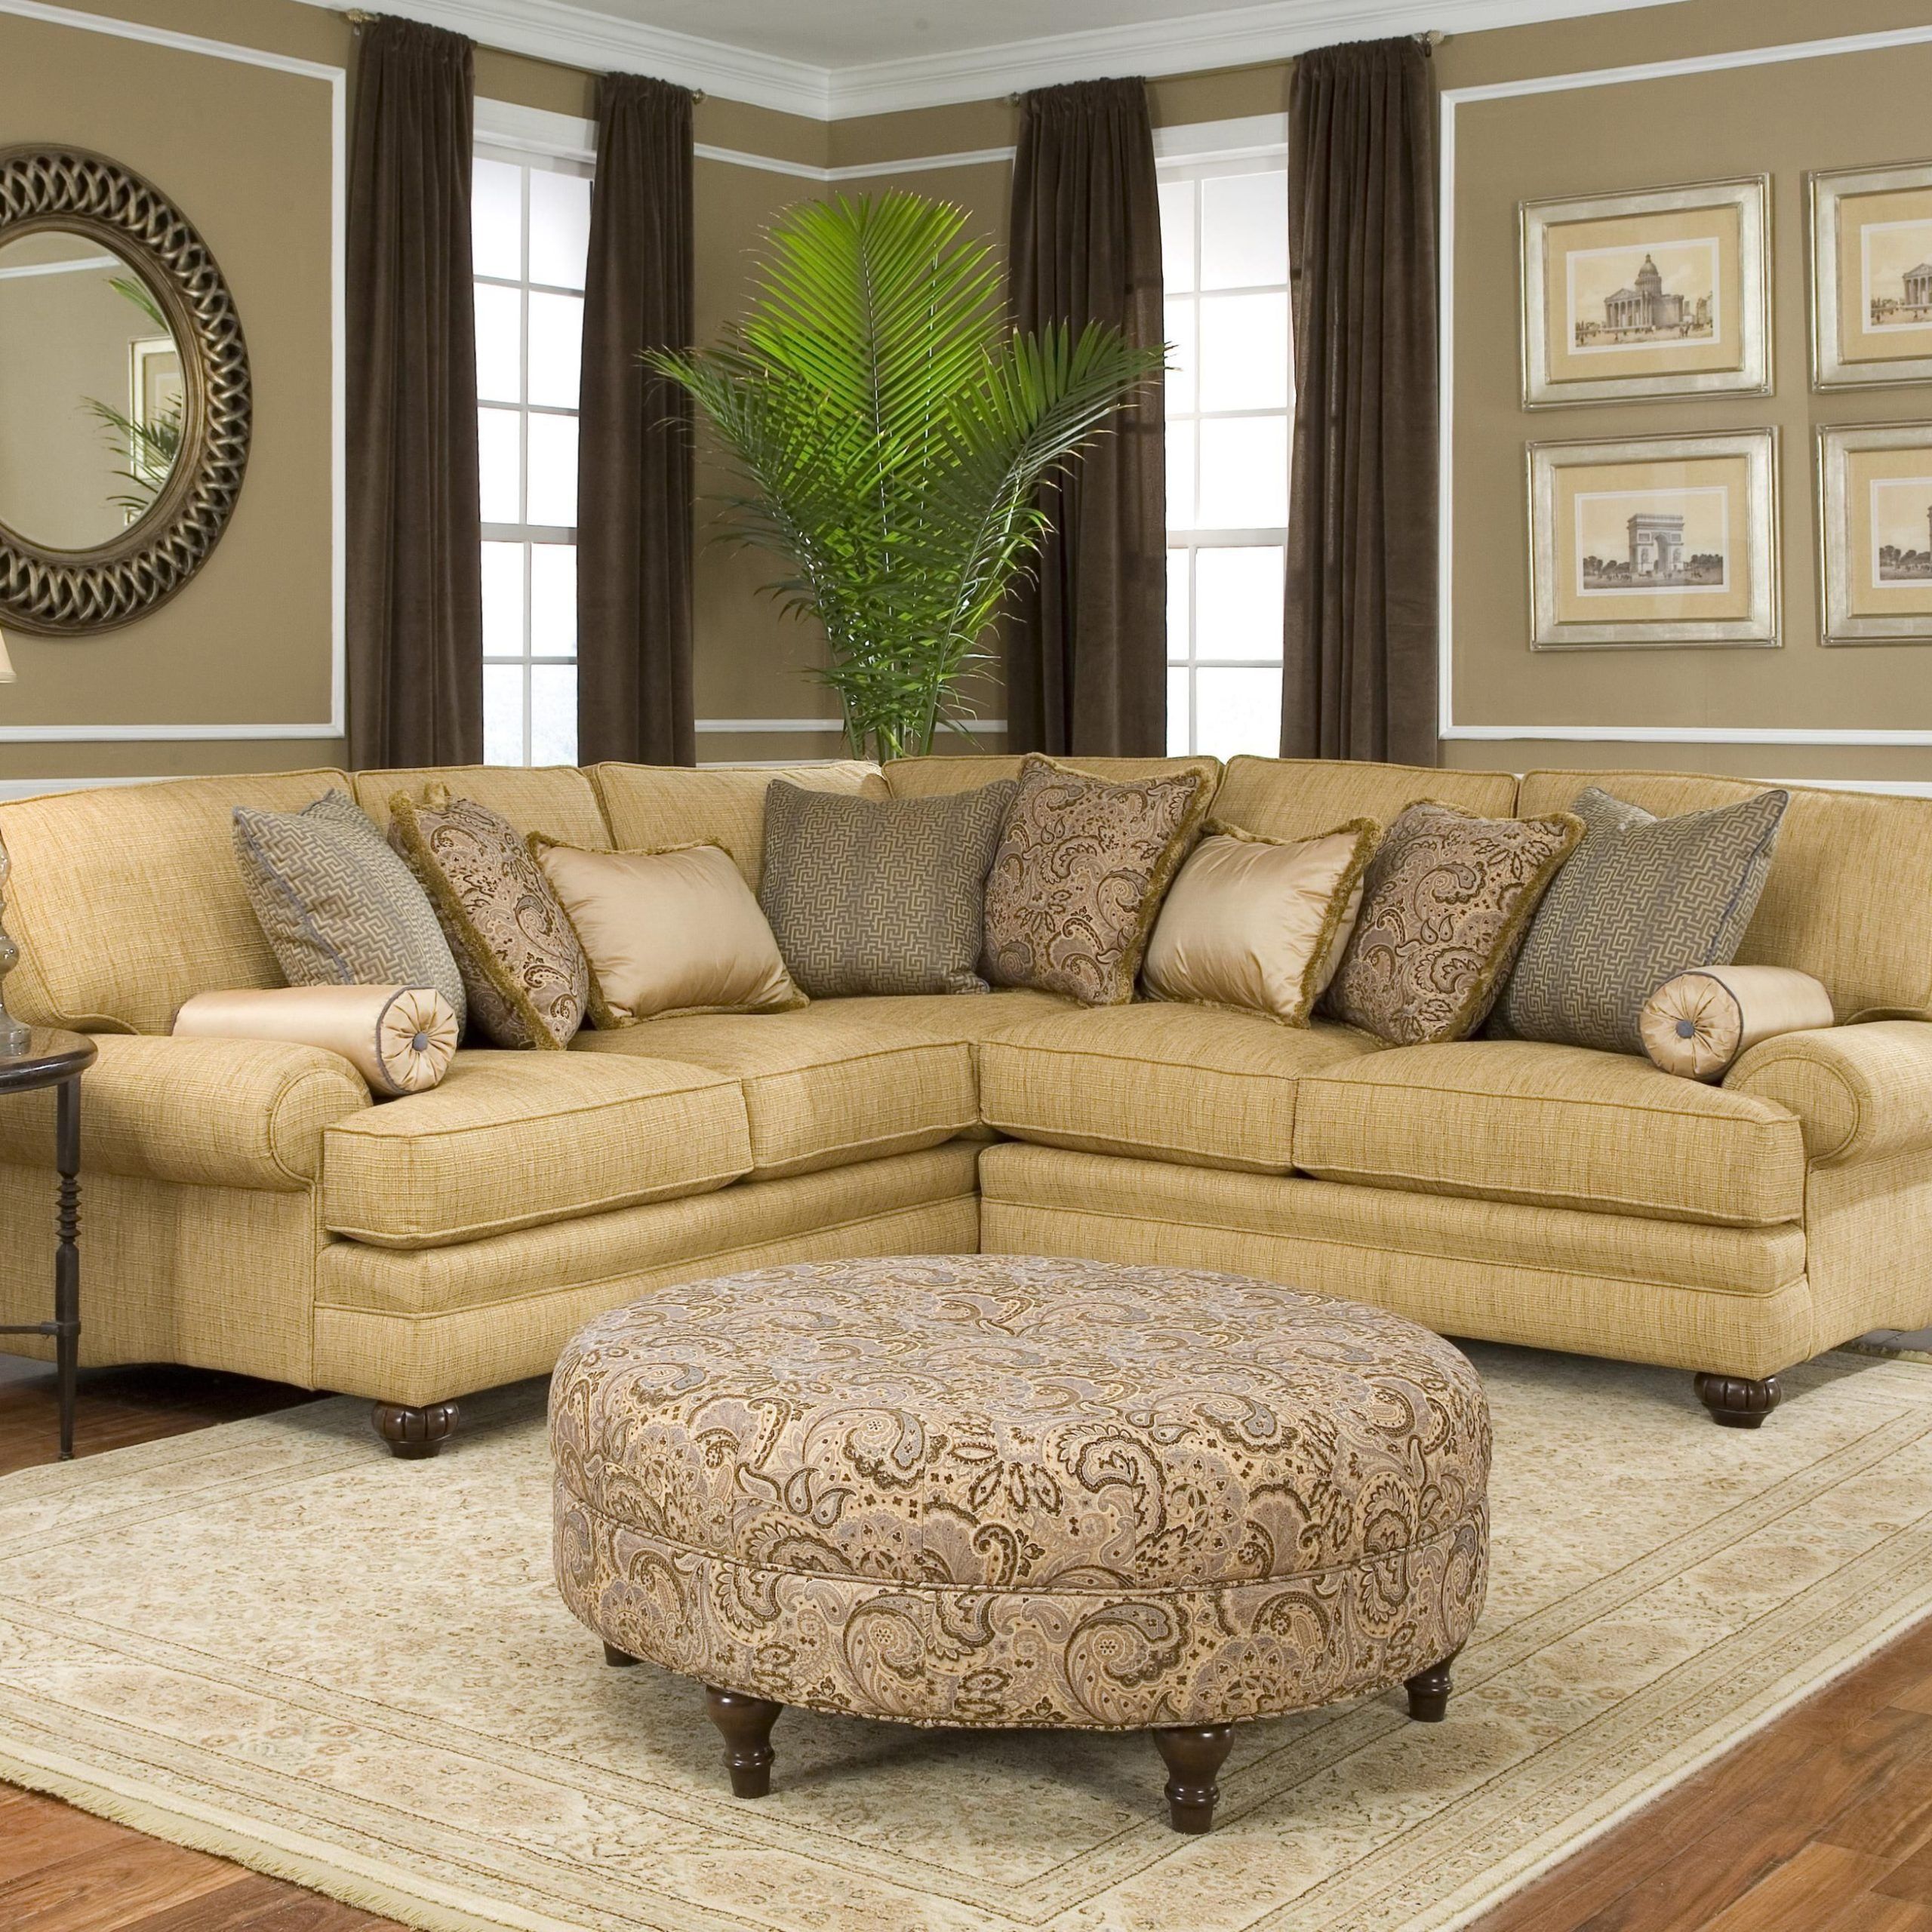 20 Top Traditional Sectional Sofas Living Room Furniture | Sofa Ideas Throughout Sofas For Living Rooms (Gallery 4 of 20)